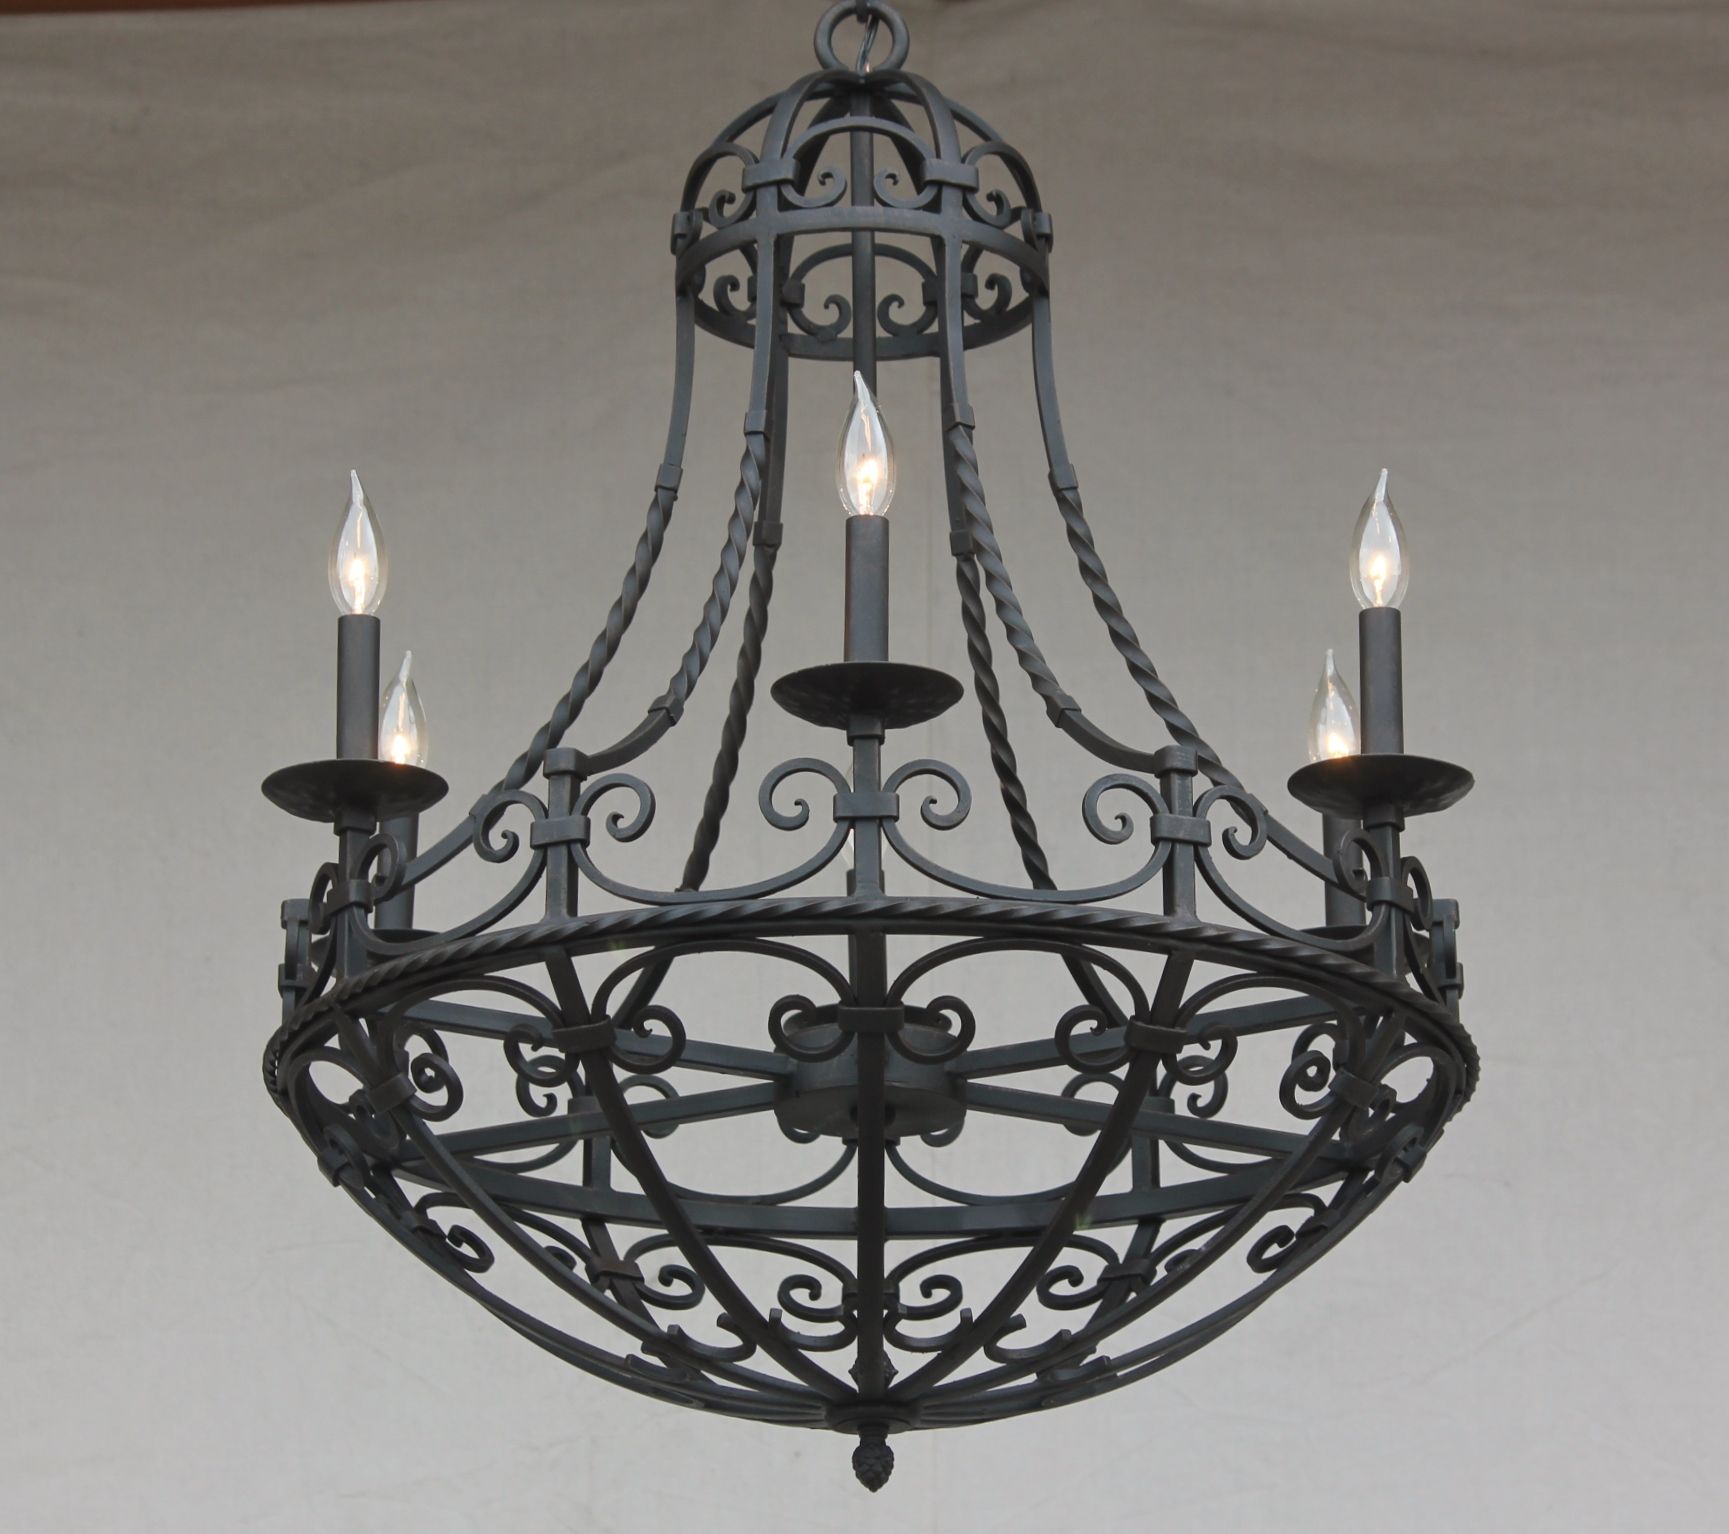 Lights of Tuscany 12656 Spanish Revival / Spanish colonial Chandelier